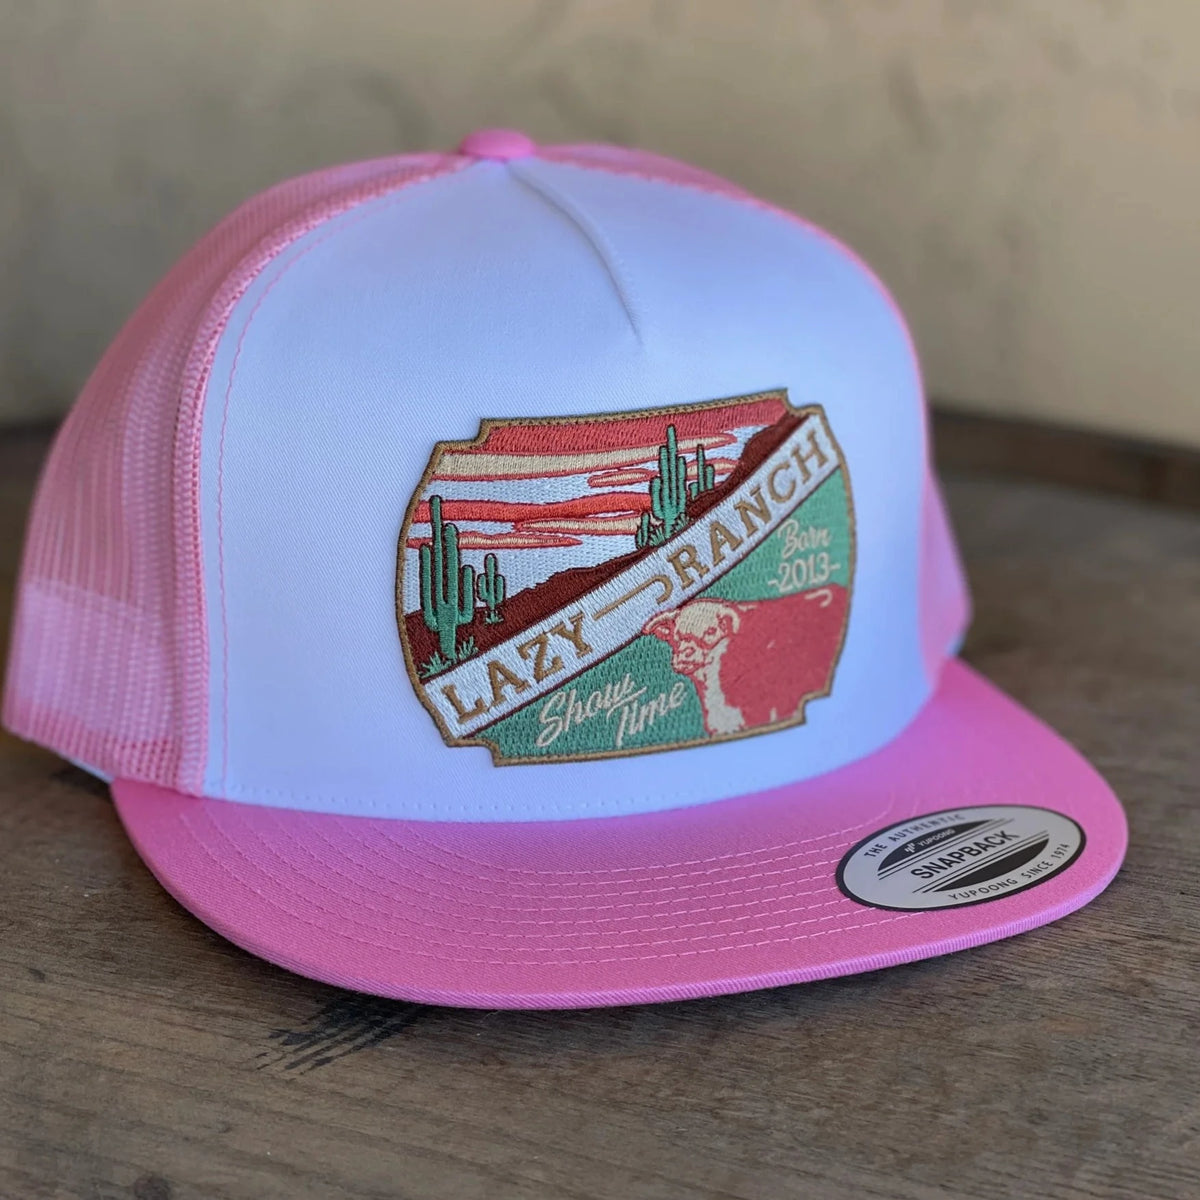 Lazy J Ranch Wear Show Time Cap in Pink & White